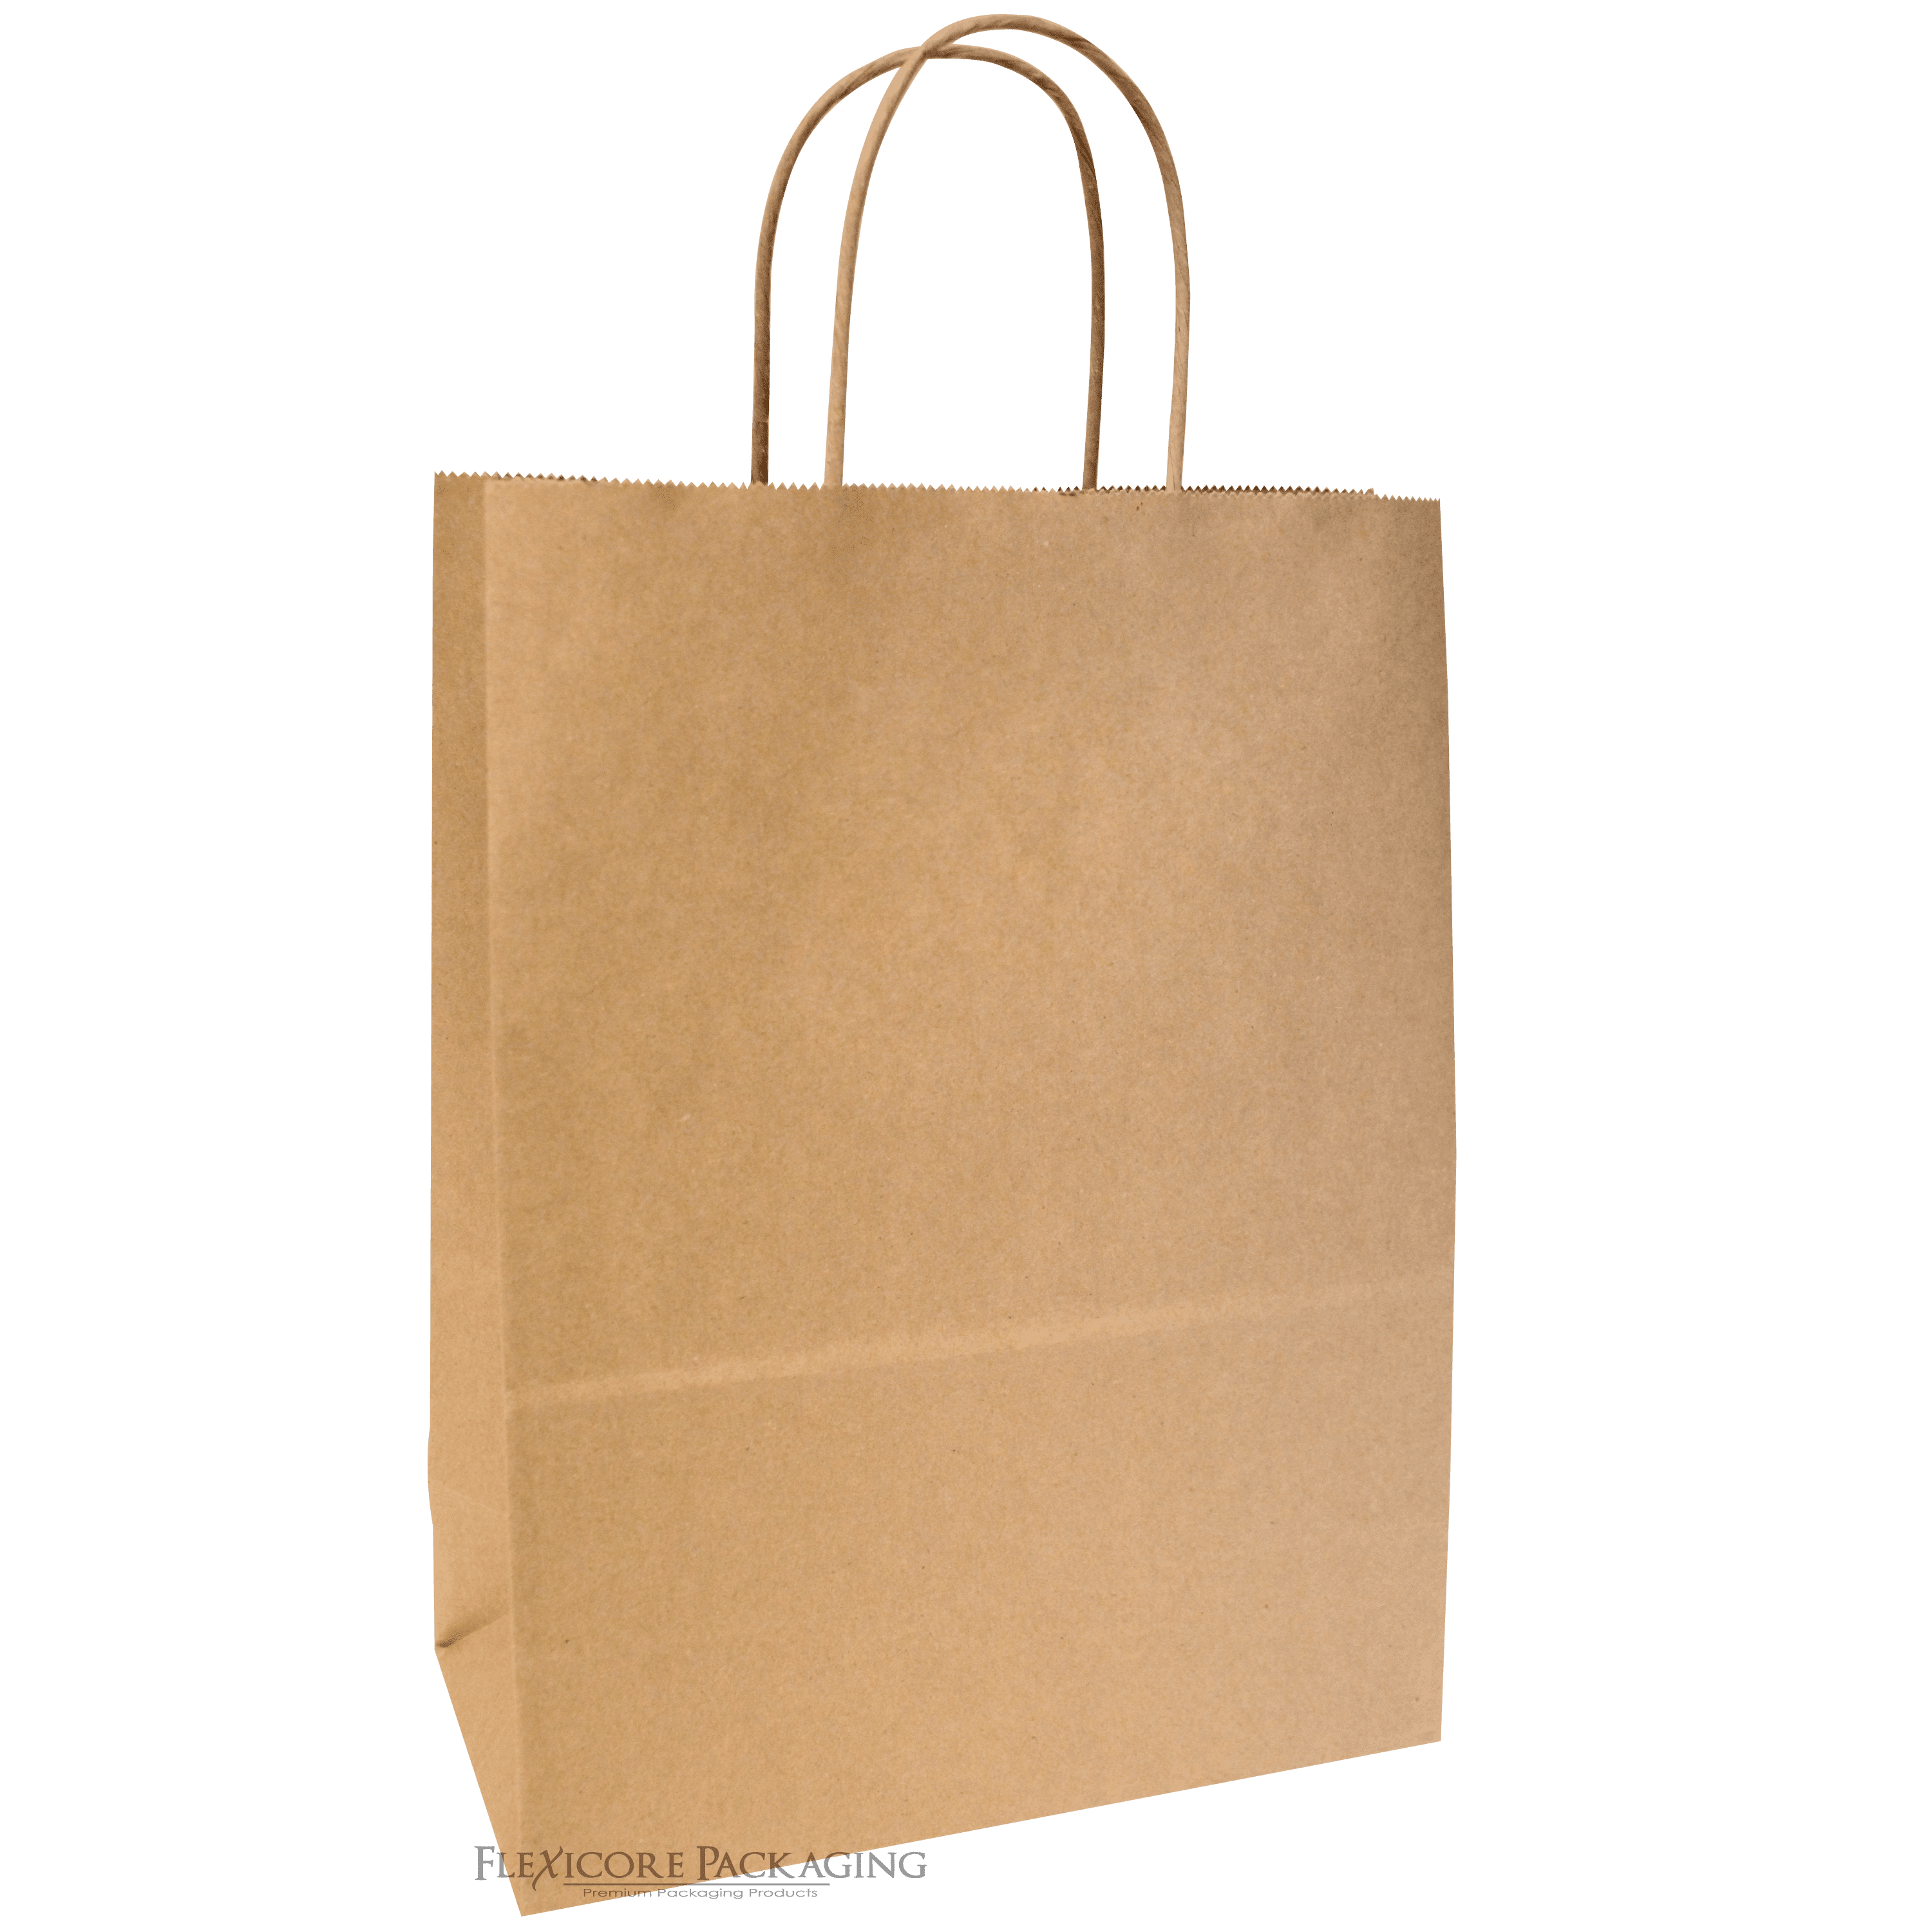 BROWN WHITE KRAFT SMALL MEDIUM LARGE PAPER CARRIER BAGS WITH HANDLES PARTY GIFT 